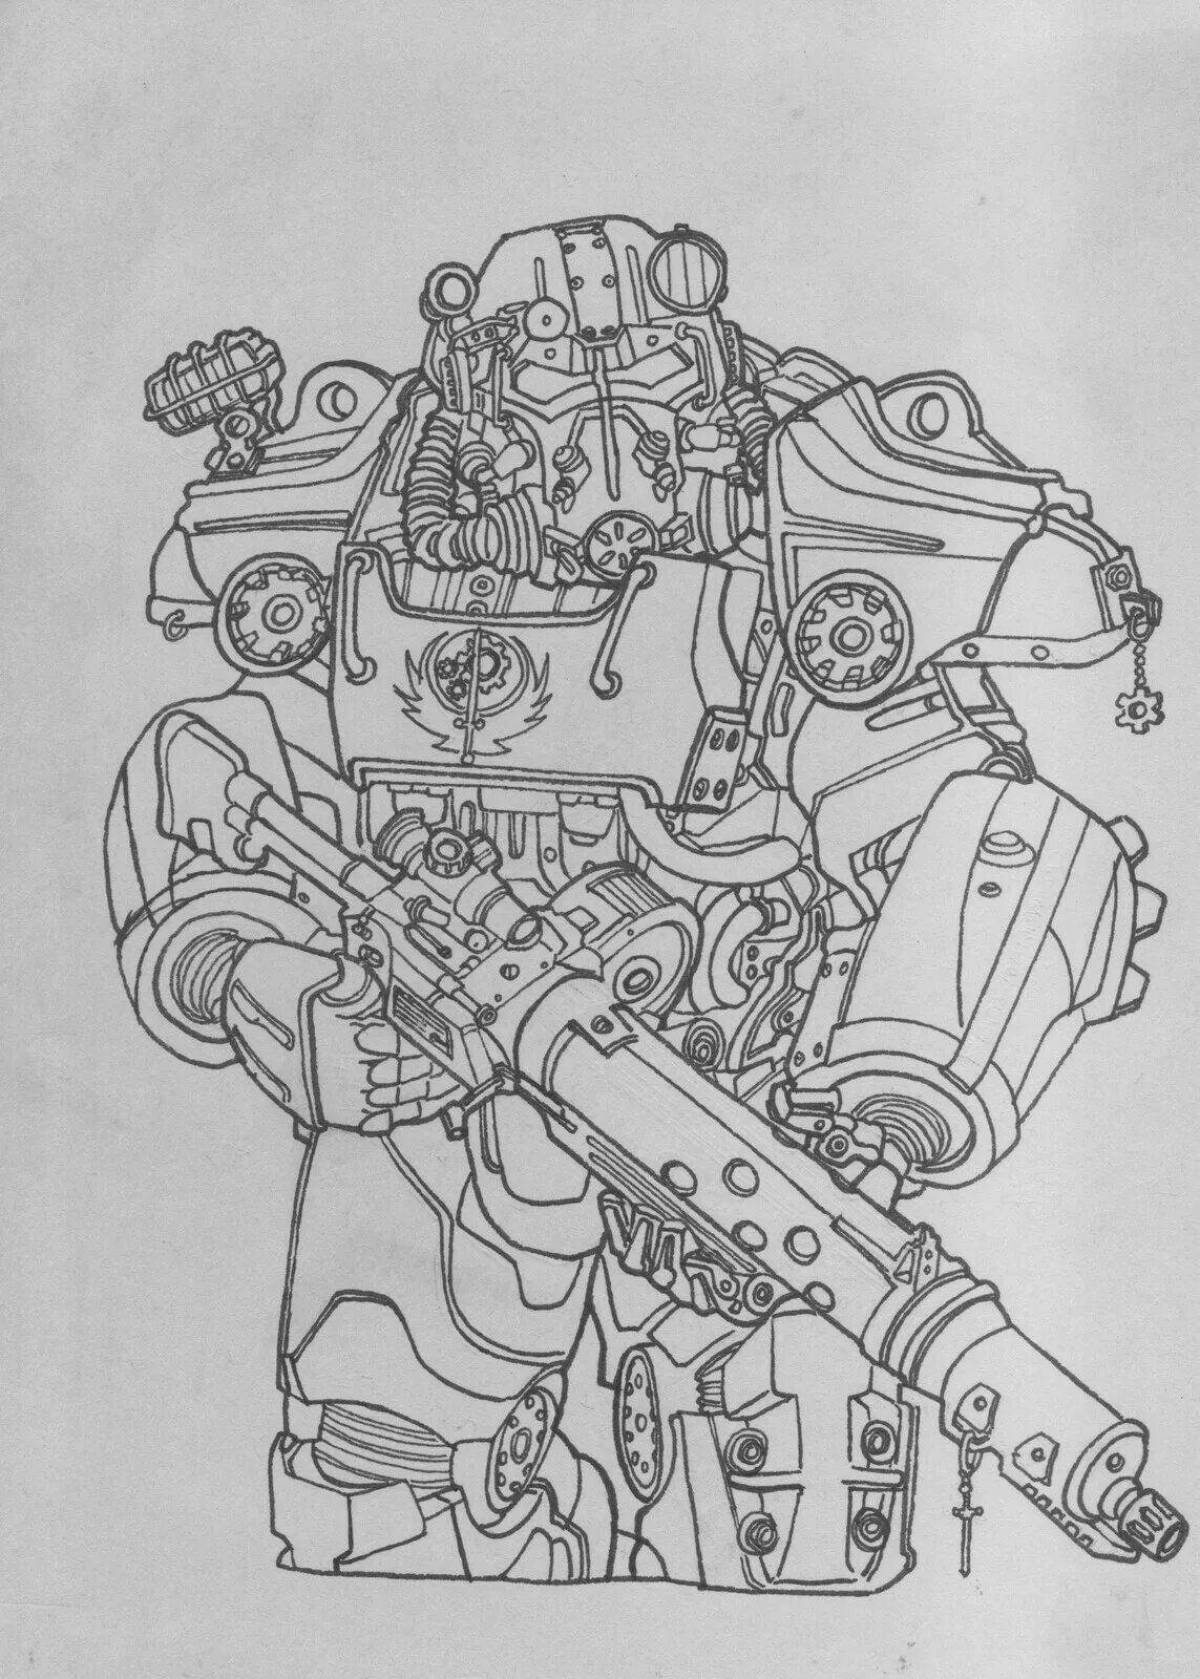 Fantastic fallout 4 power armor coloring page